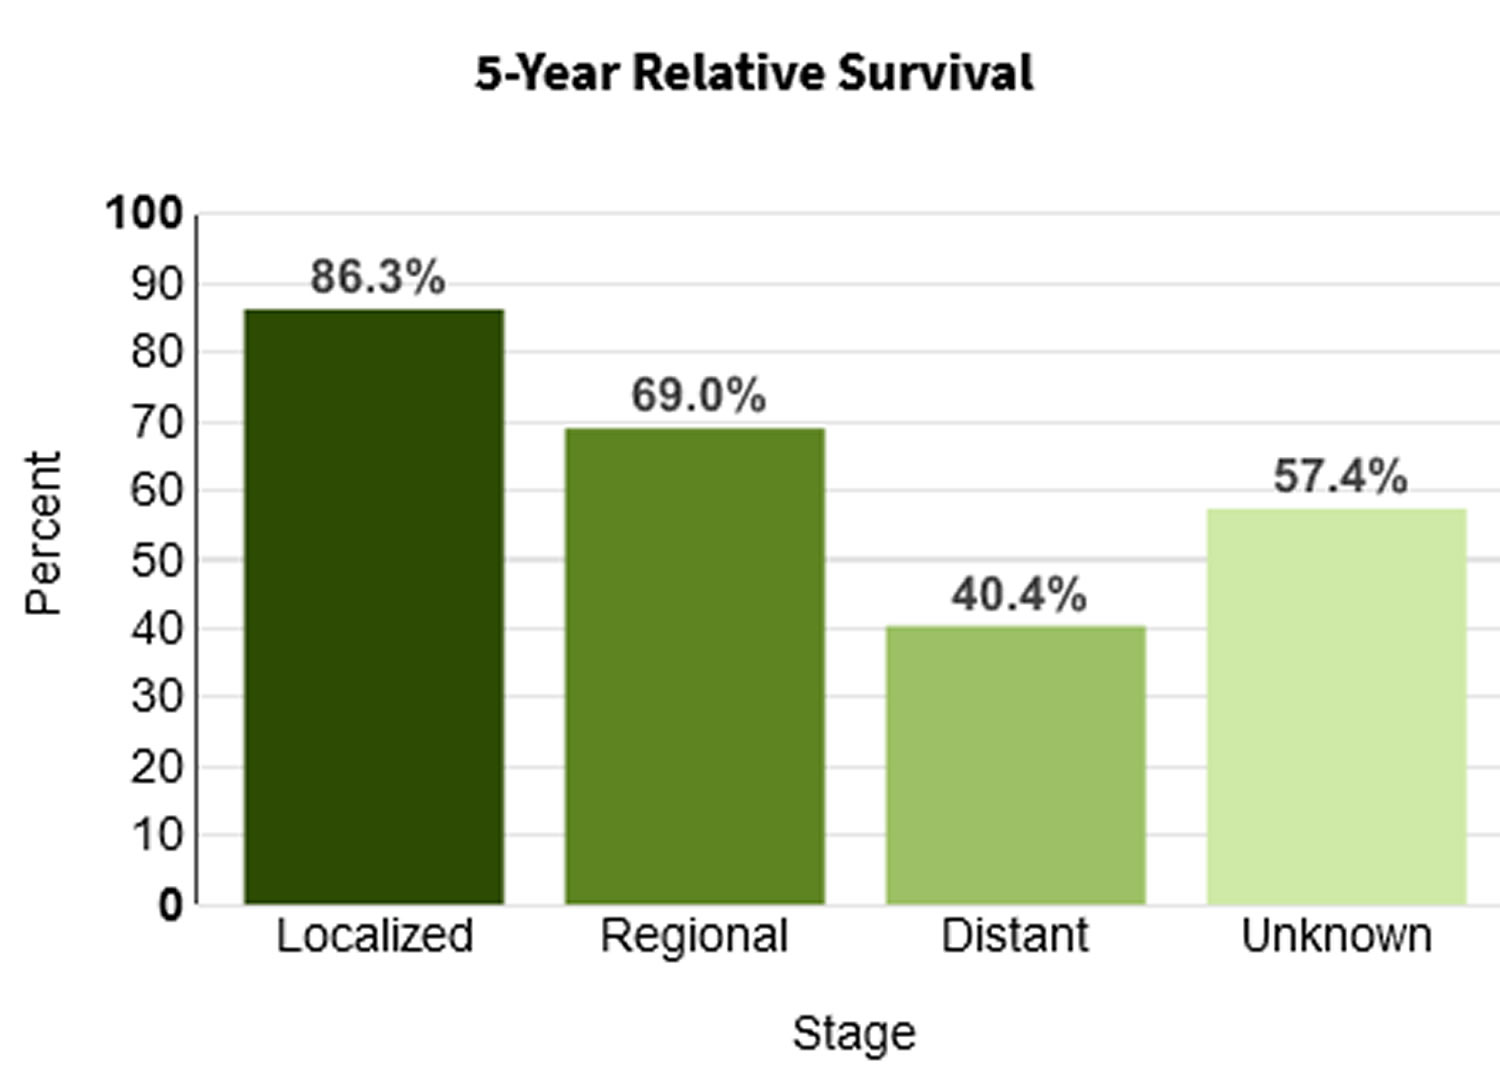 Oral cancer 5-year Relative Survival rates